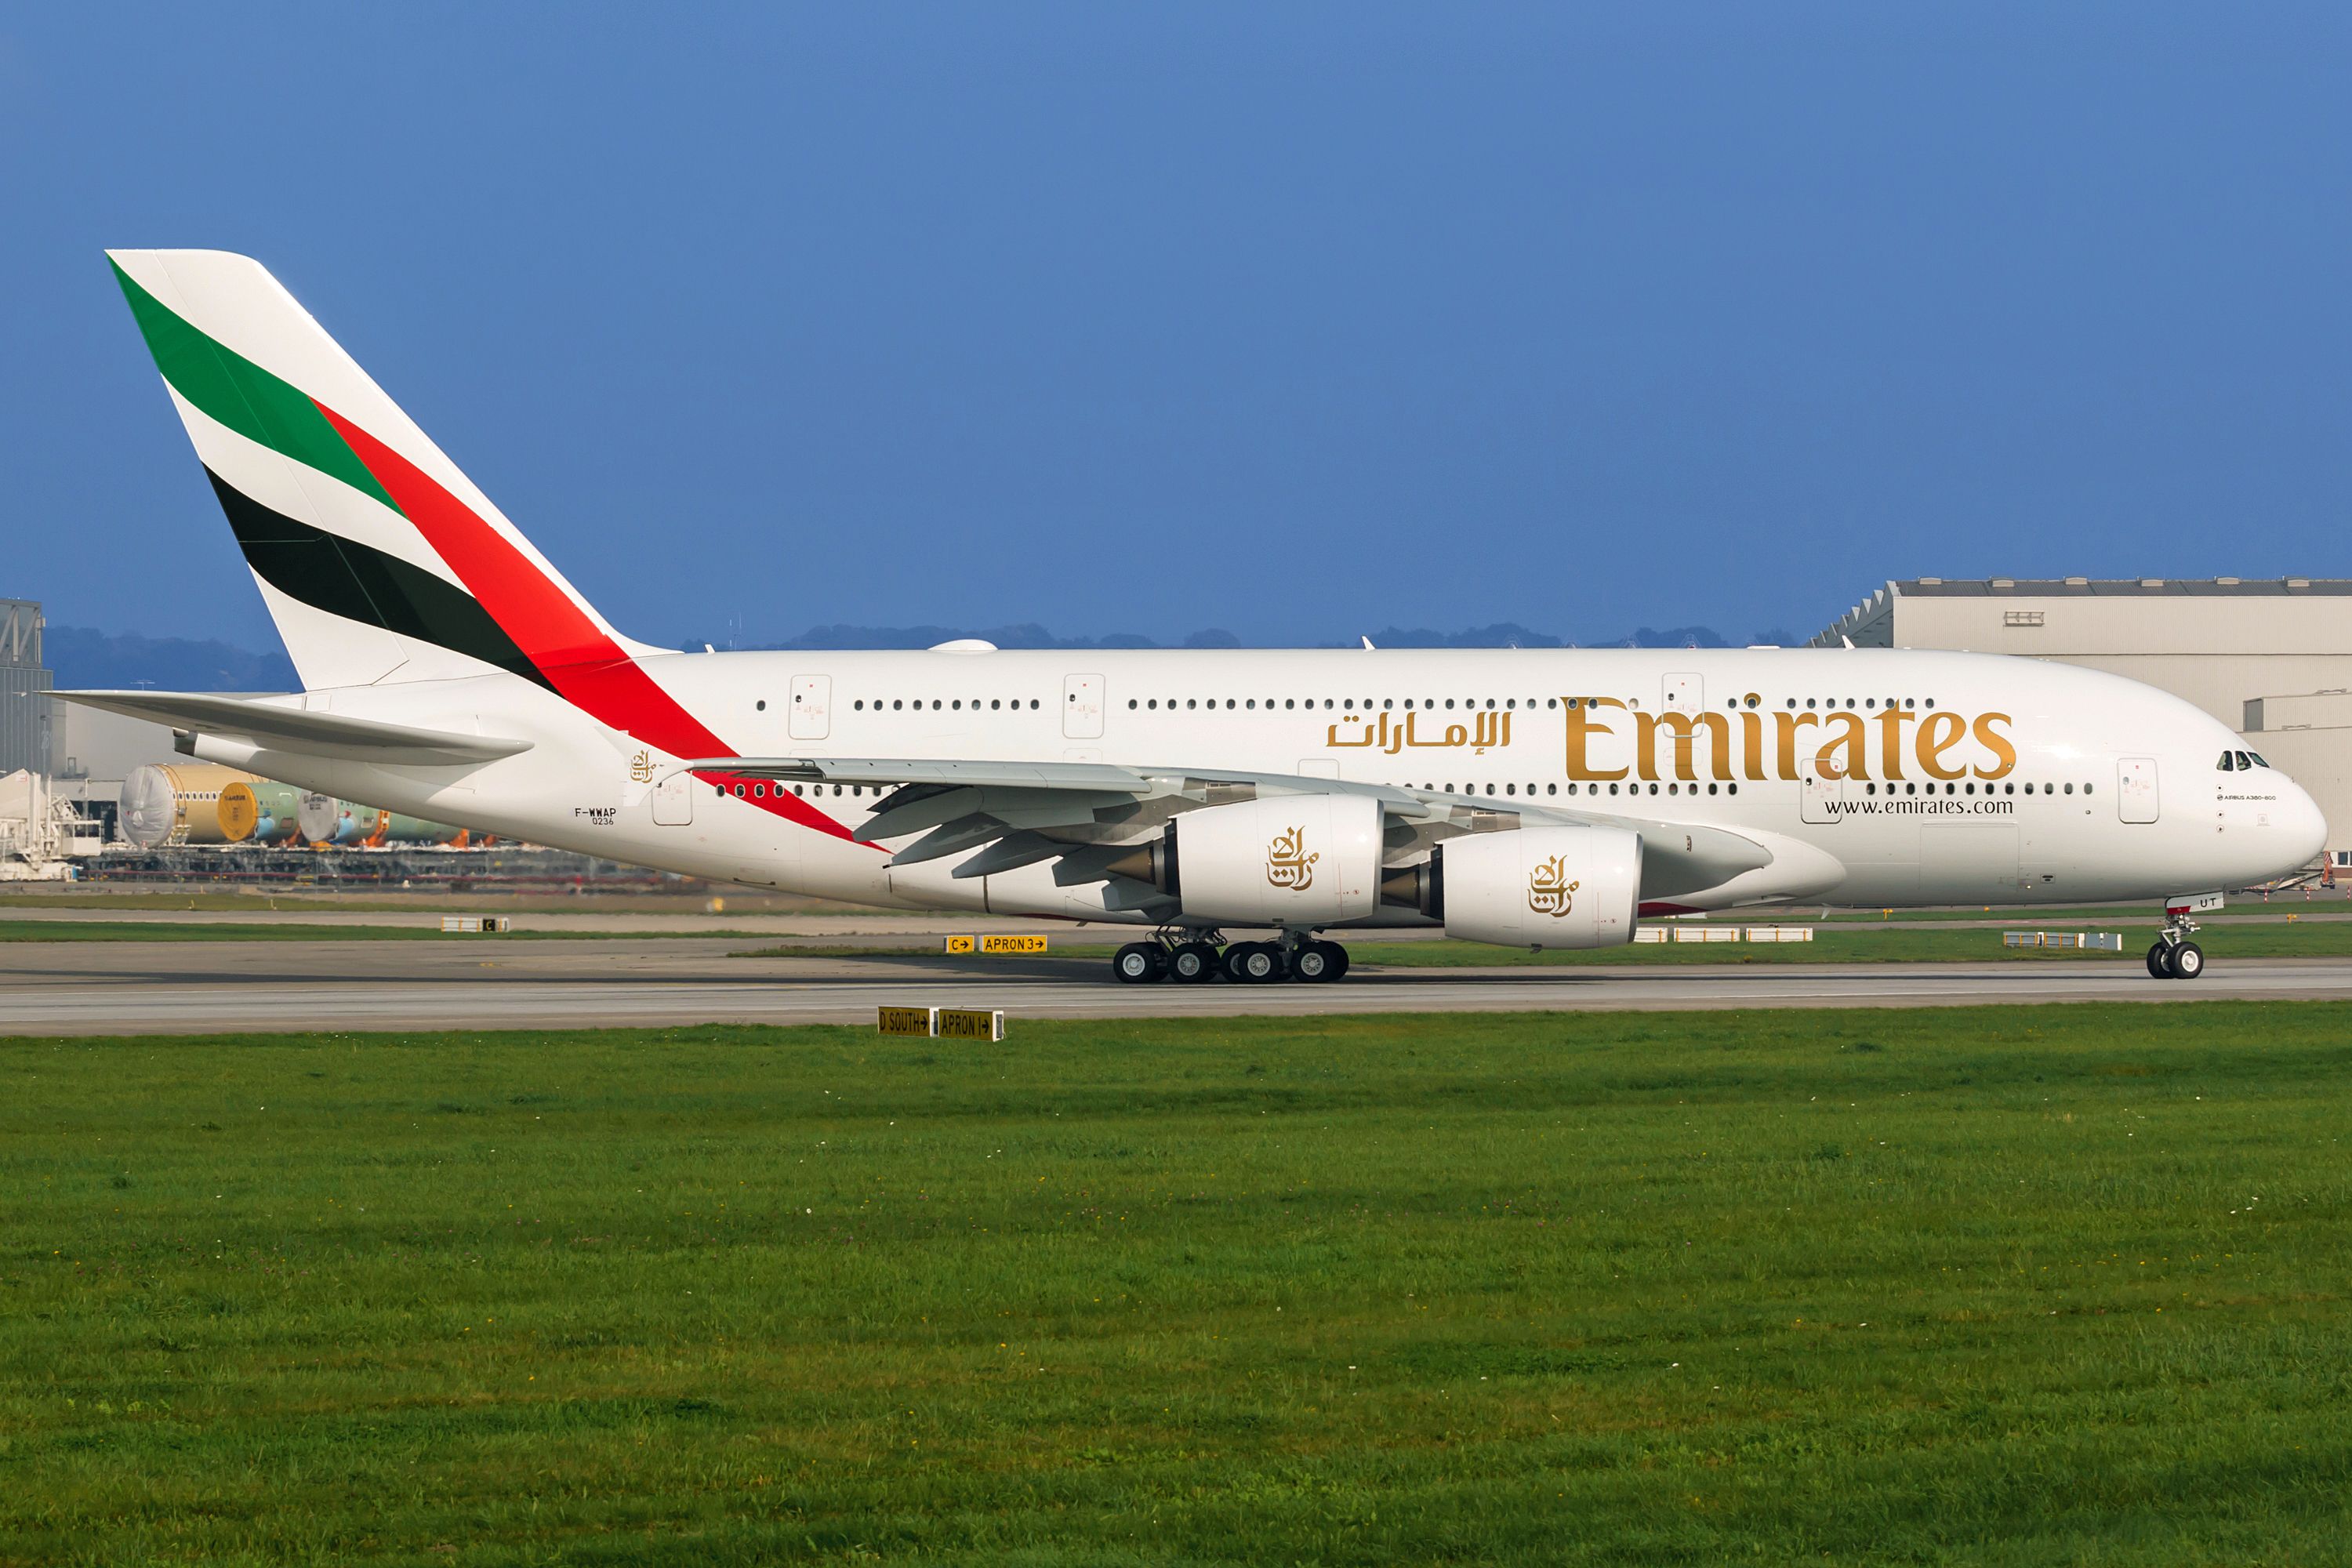 Emirates A380 on a taxiway.